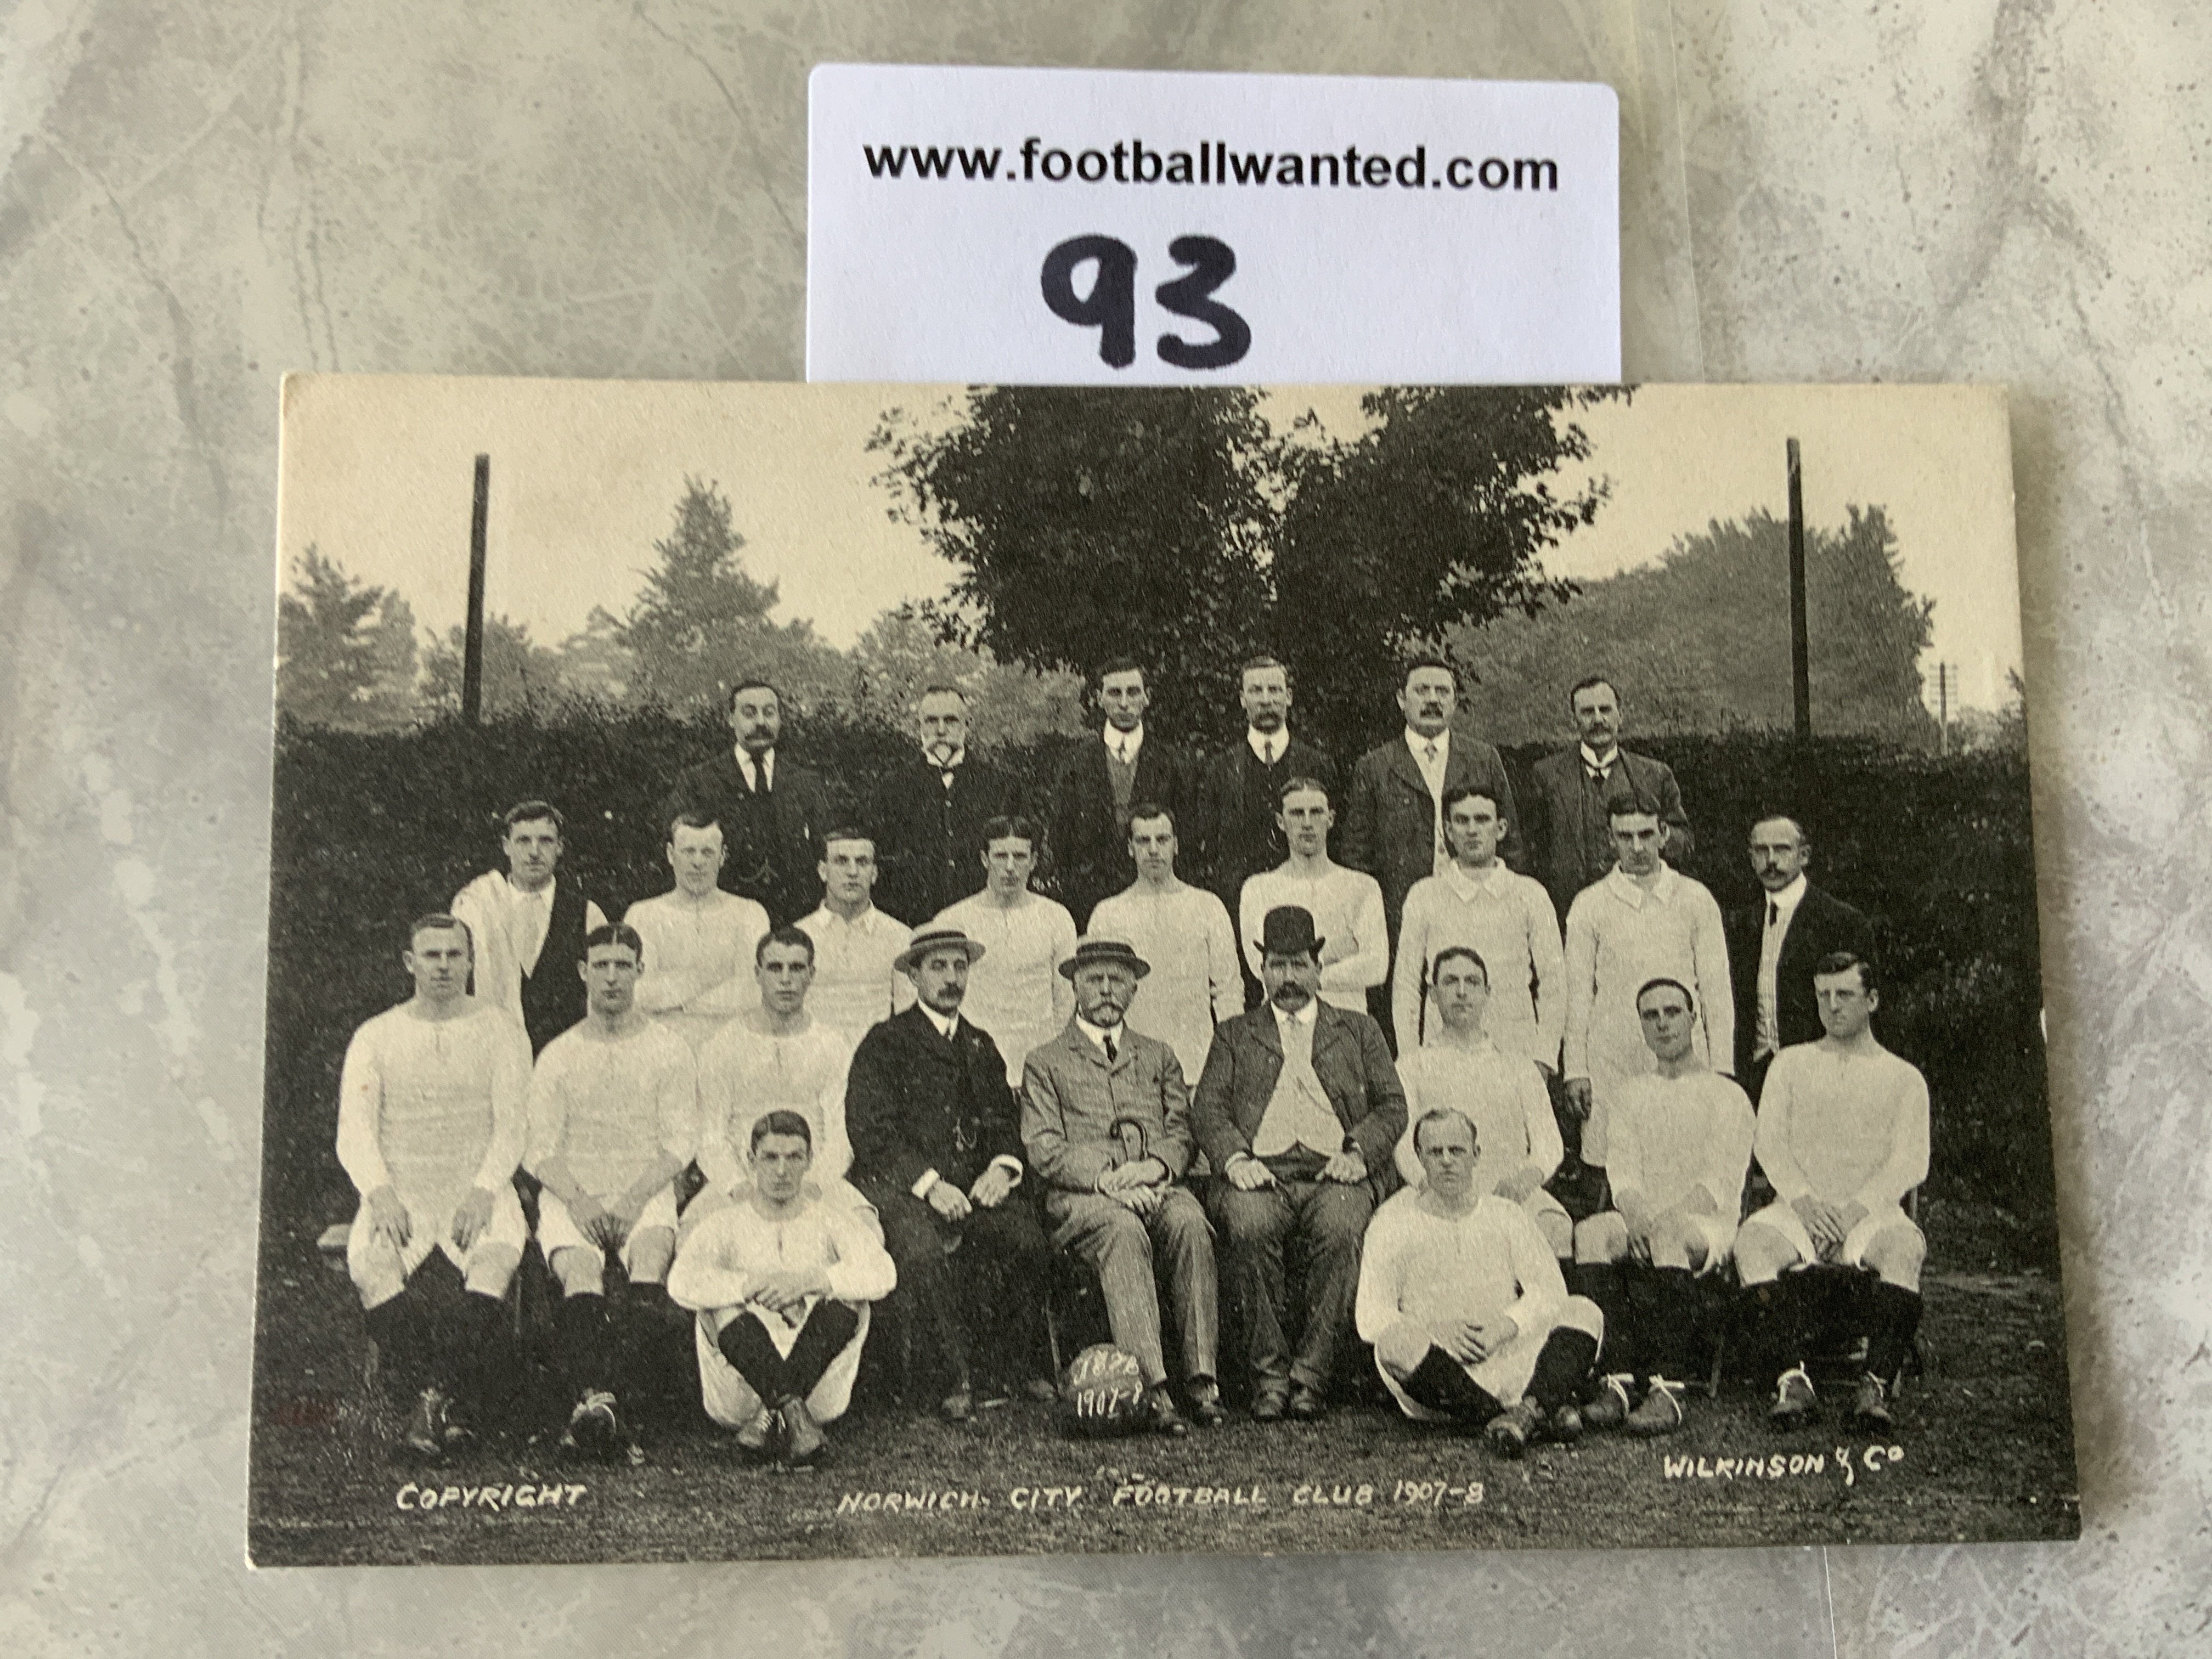 1907/1908 Norwich City Football Team Postcard: Excellent condition by Wilkinson with players and